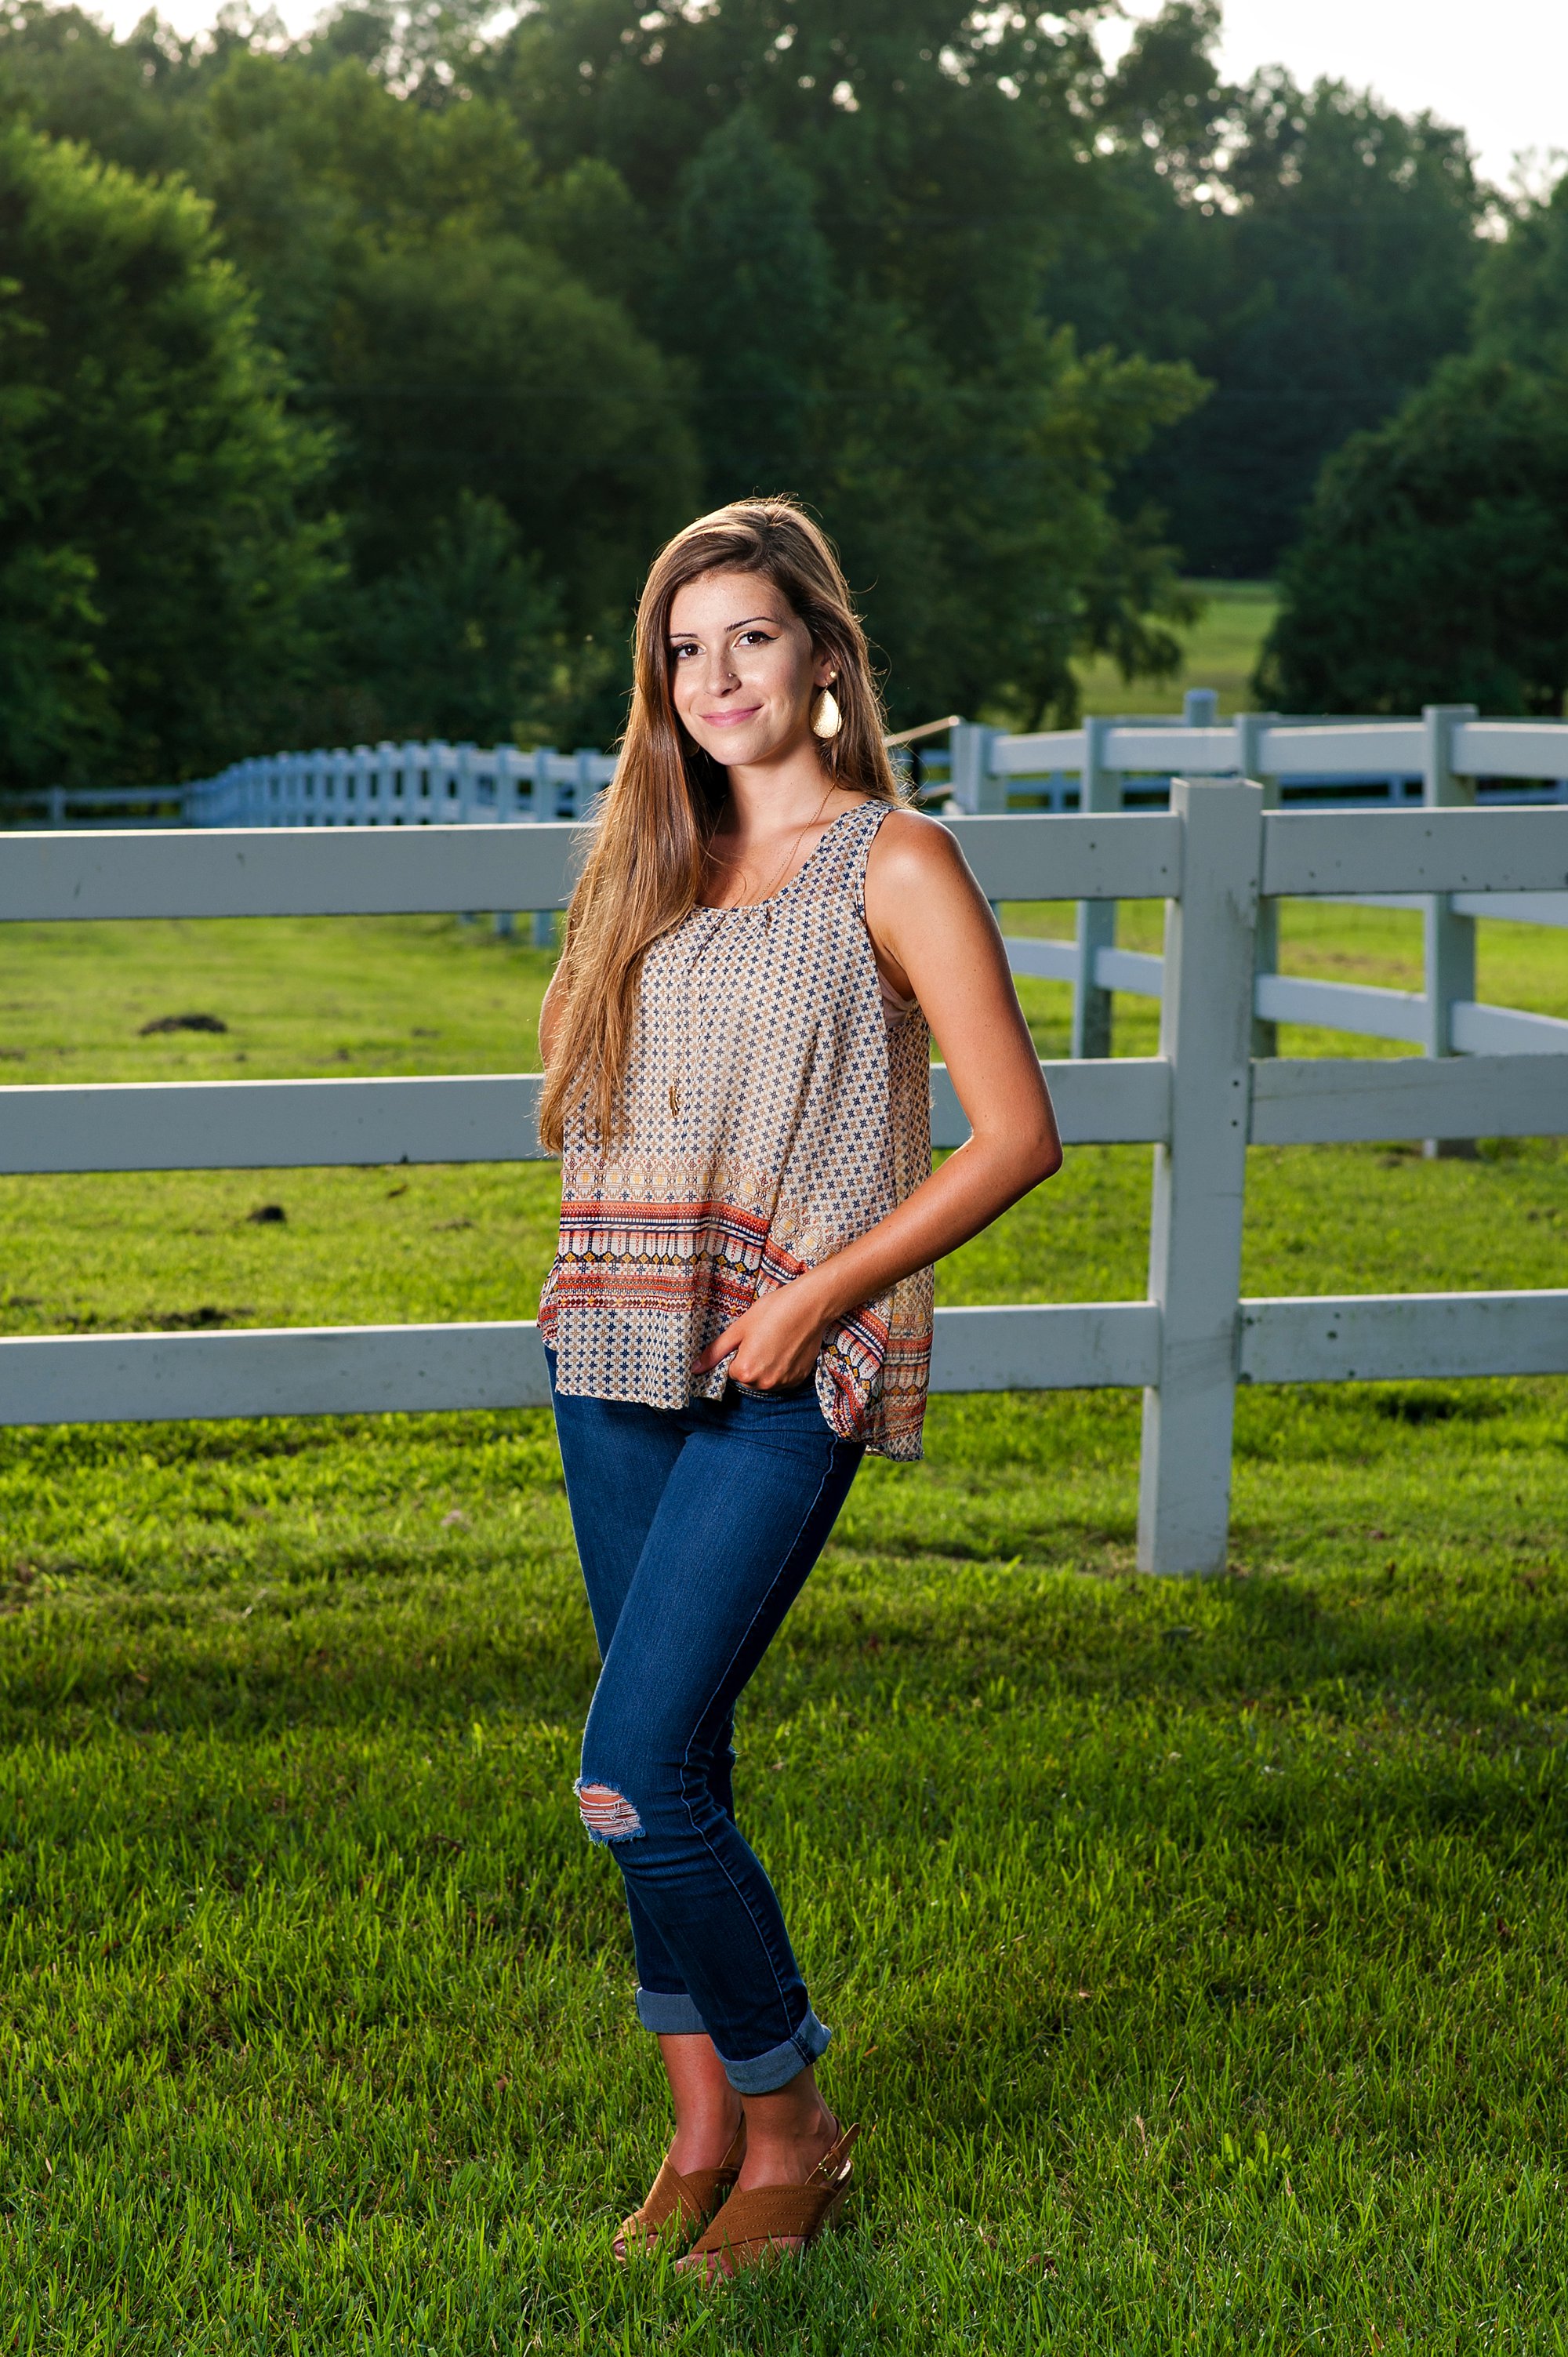 richmond senior pictures at amber grove on lawn using off camera flash